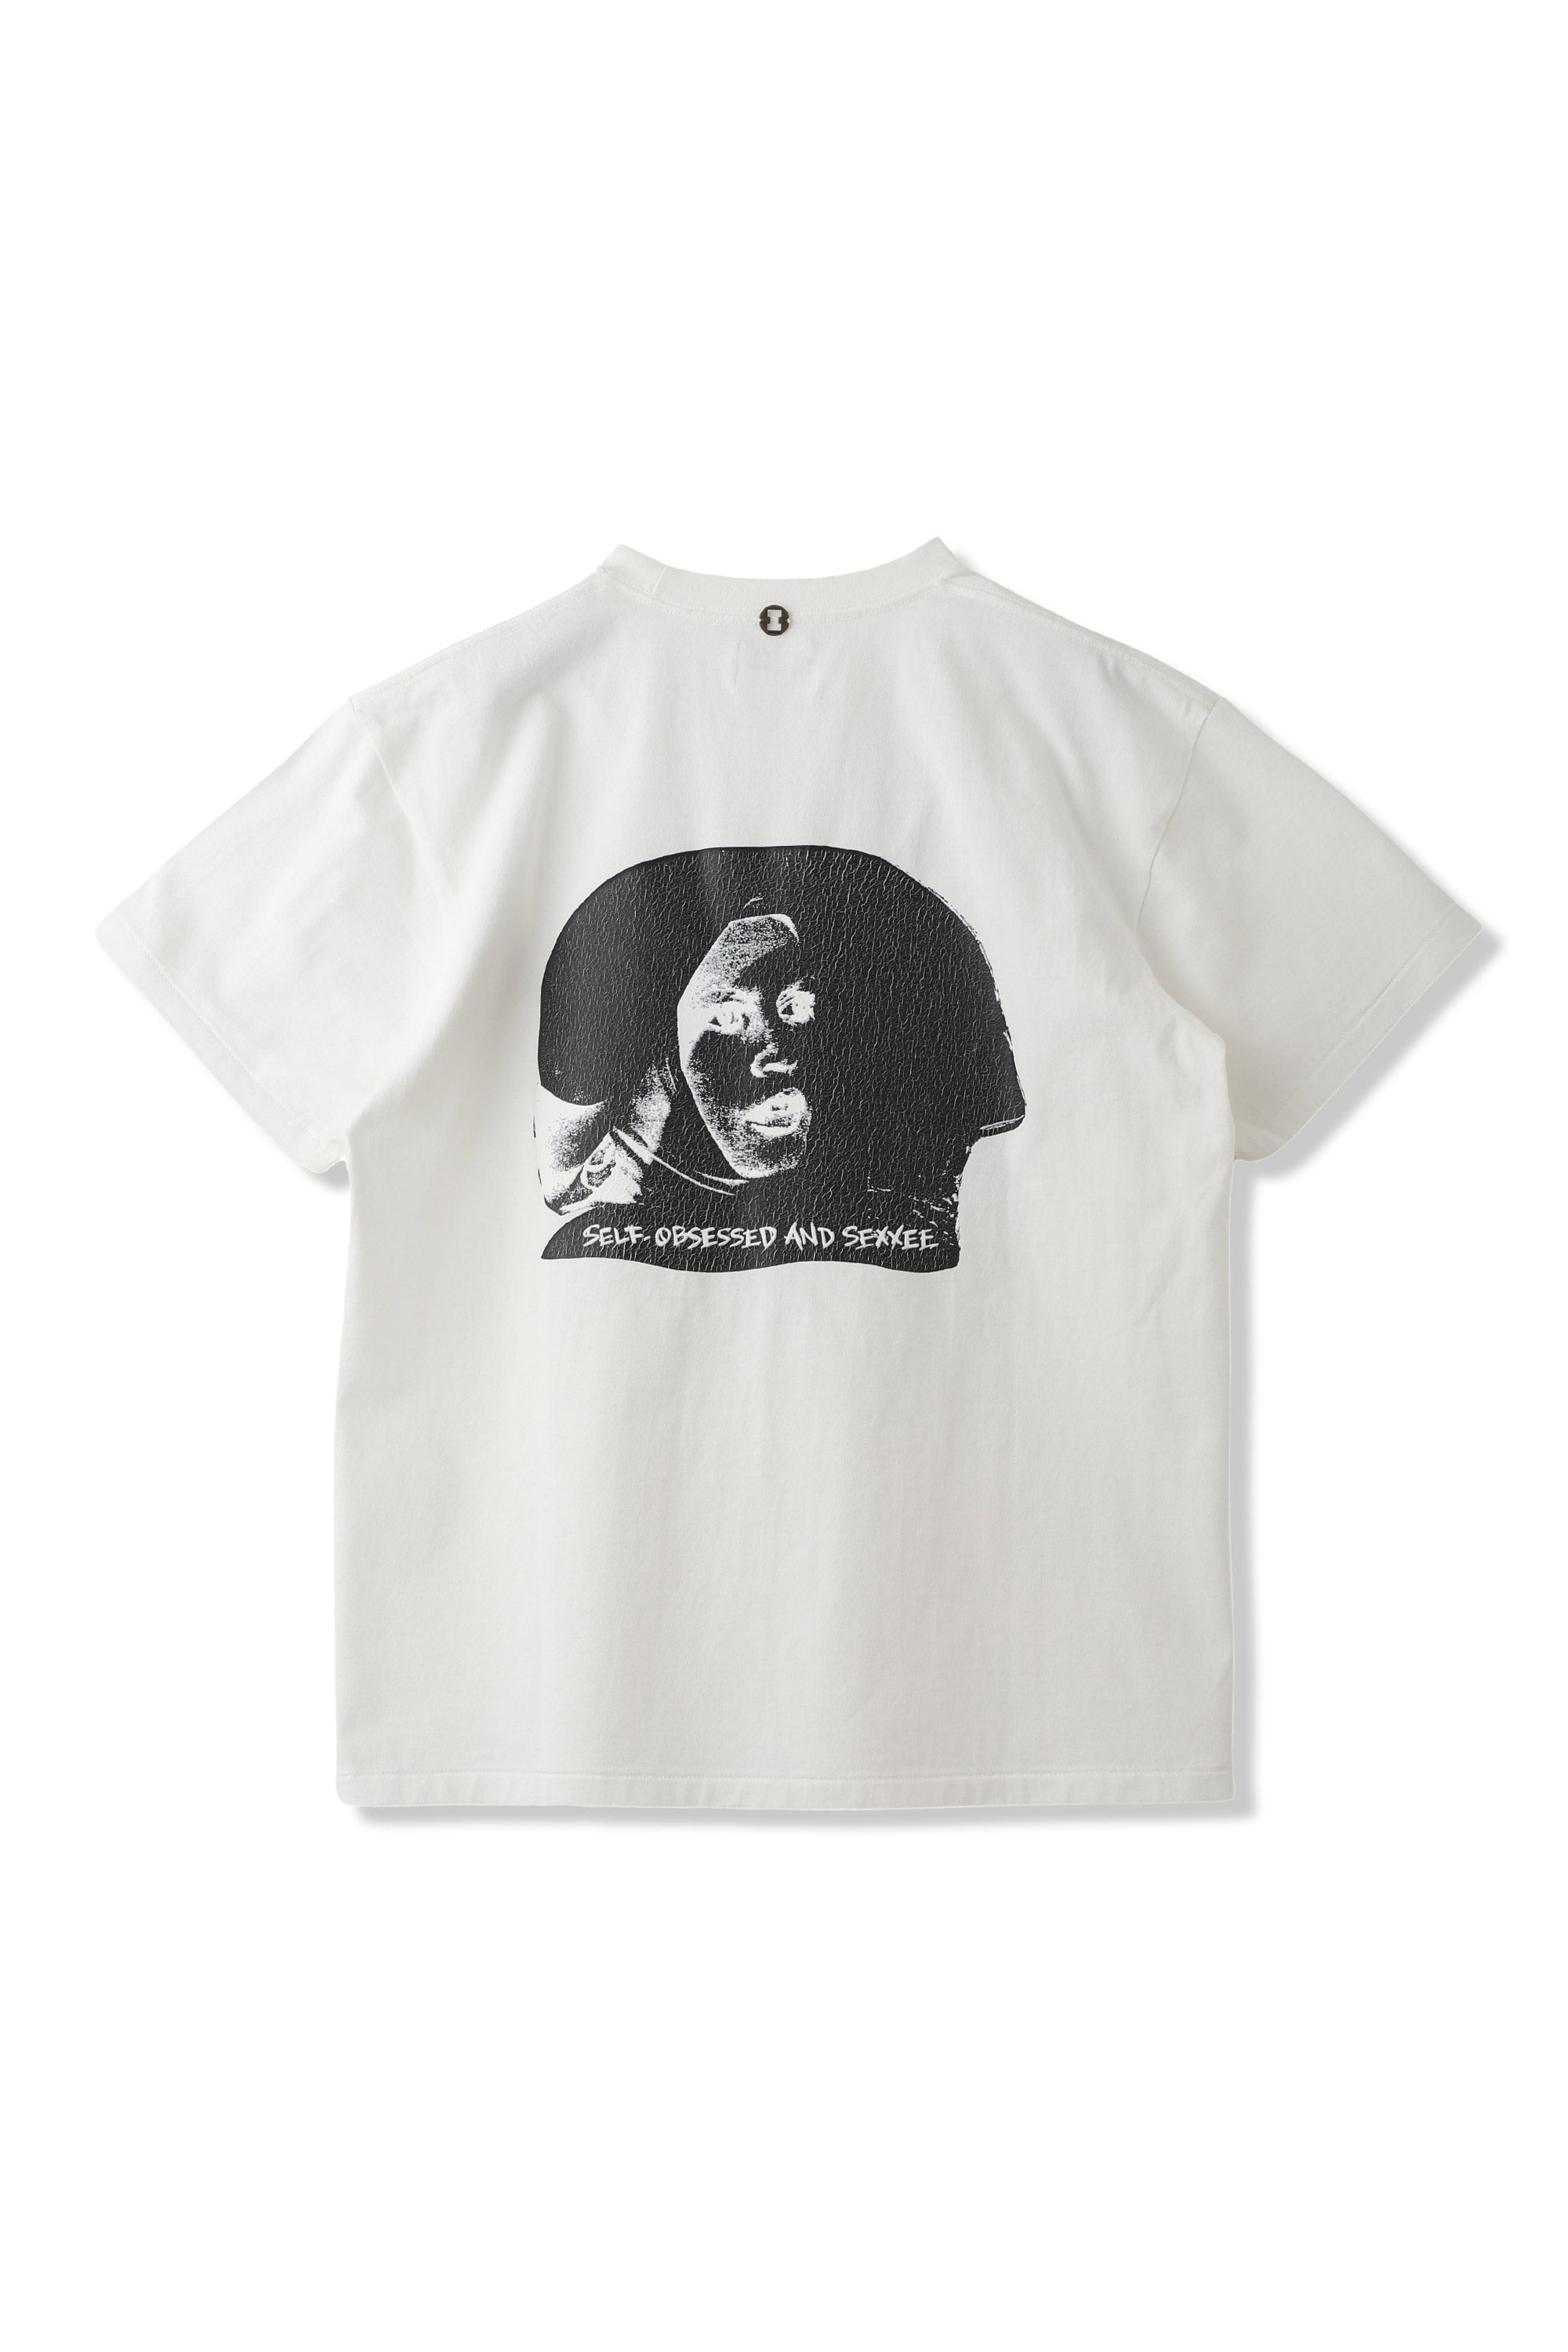 ×SONIC YOUTH SELF OBSESSED AND SEXXEE TEE WHITE